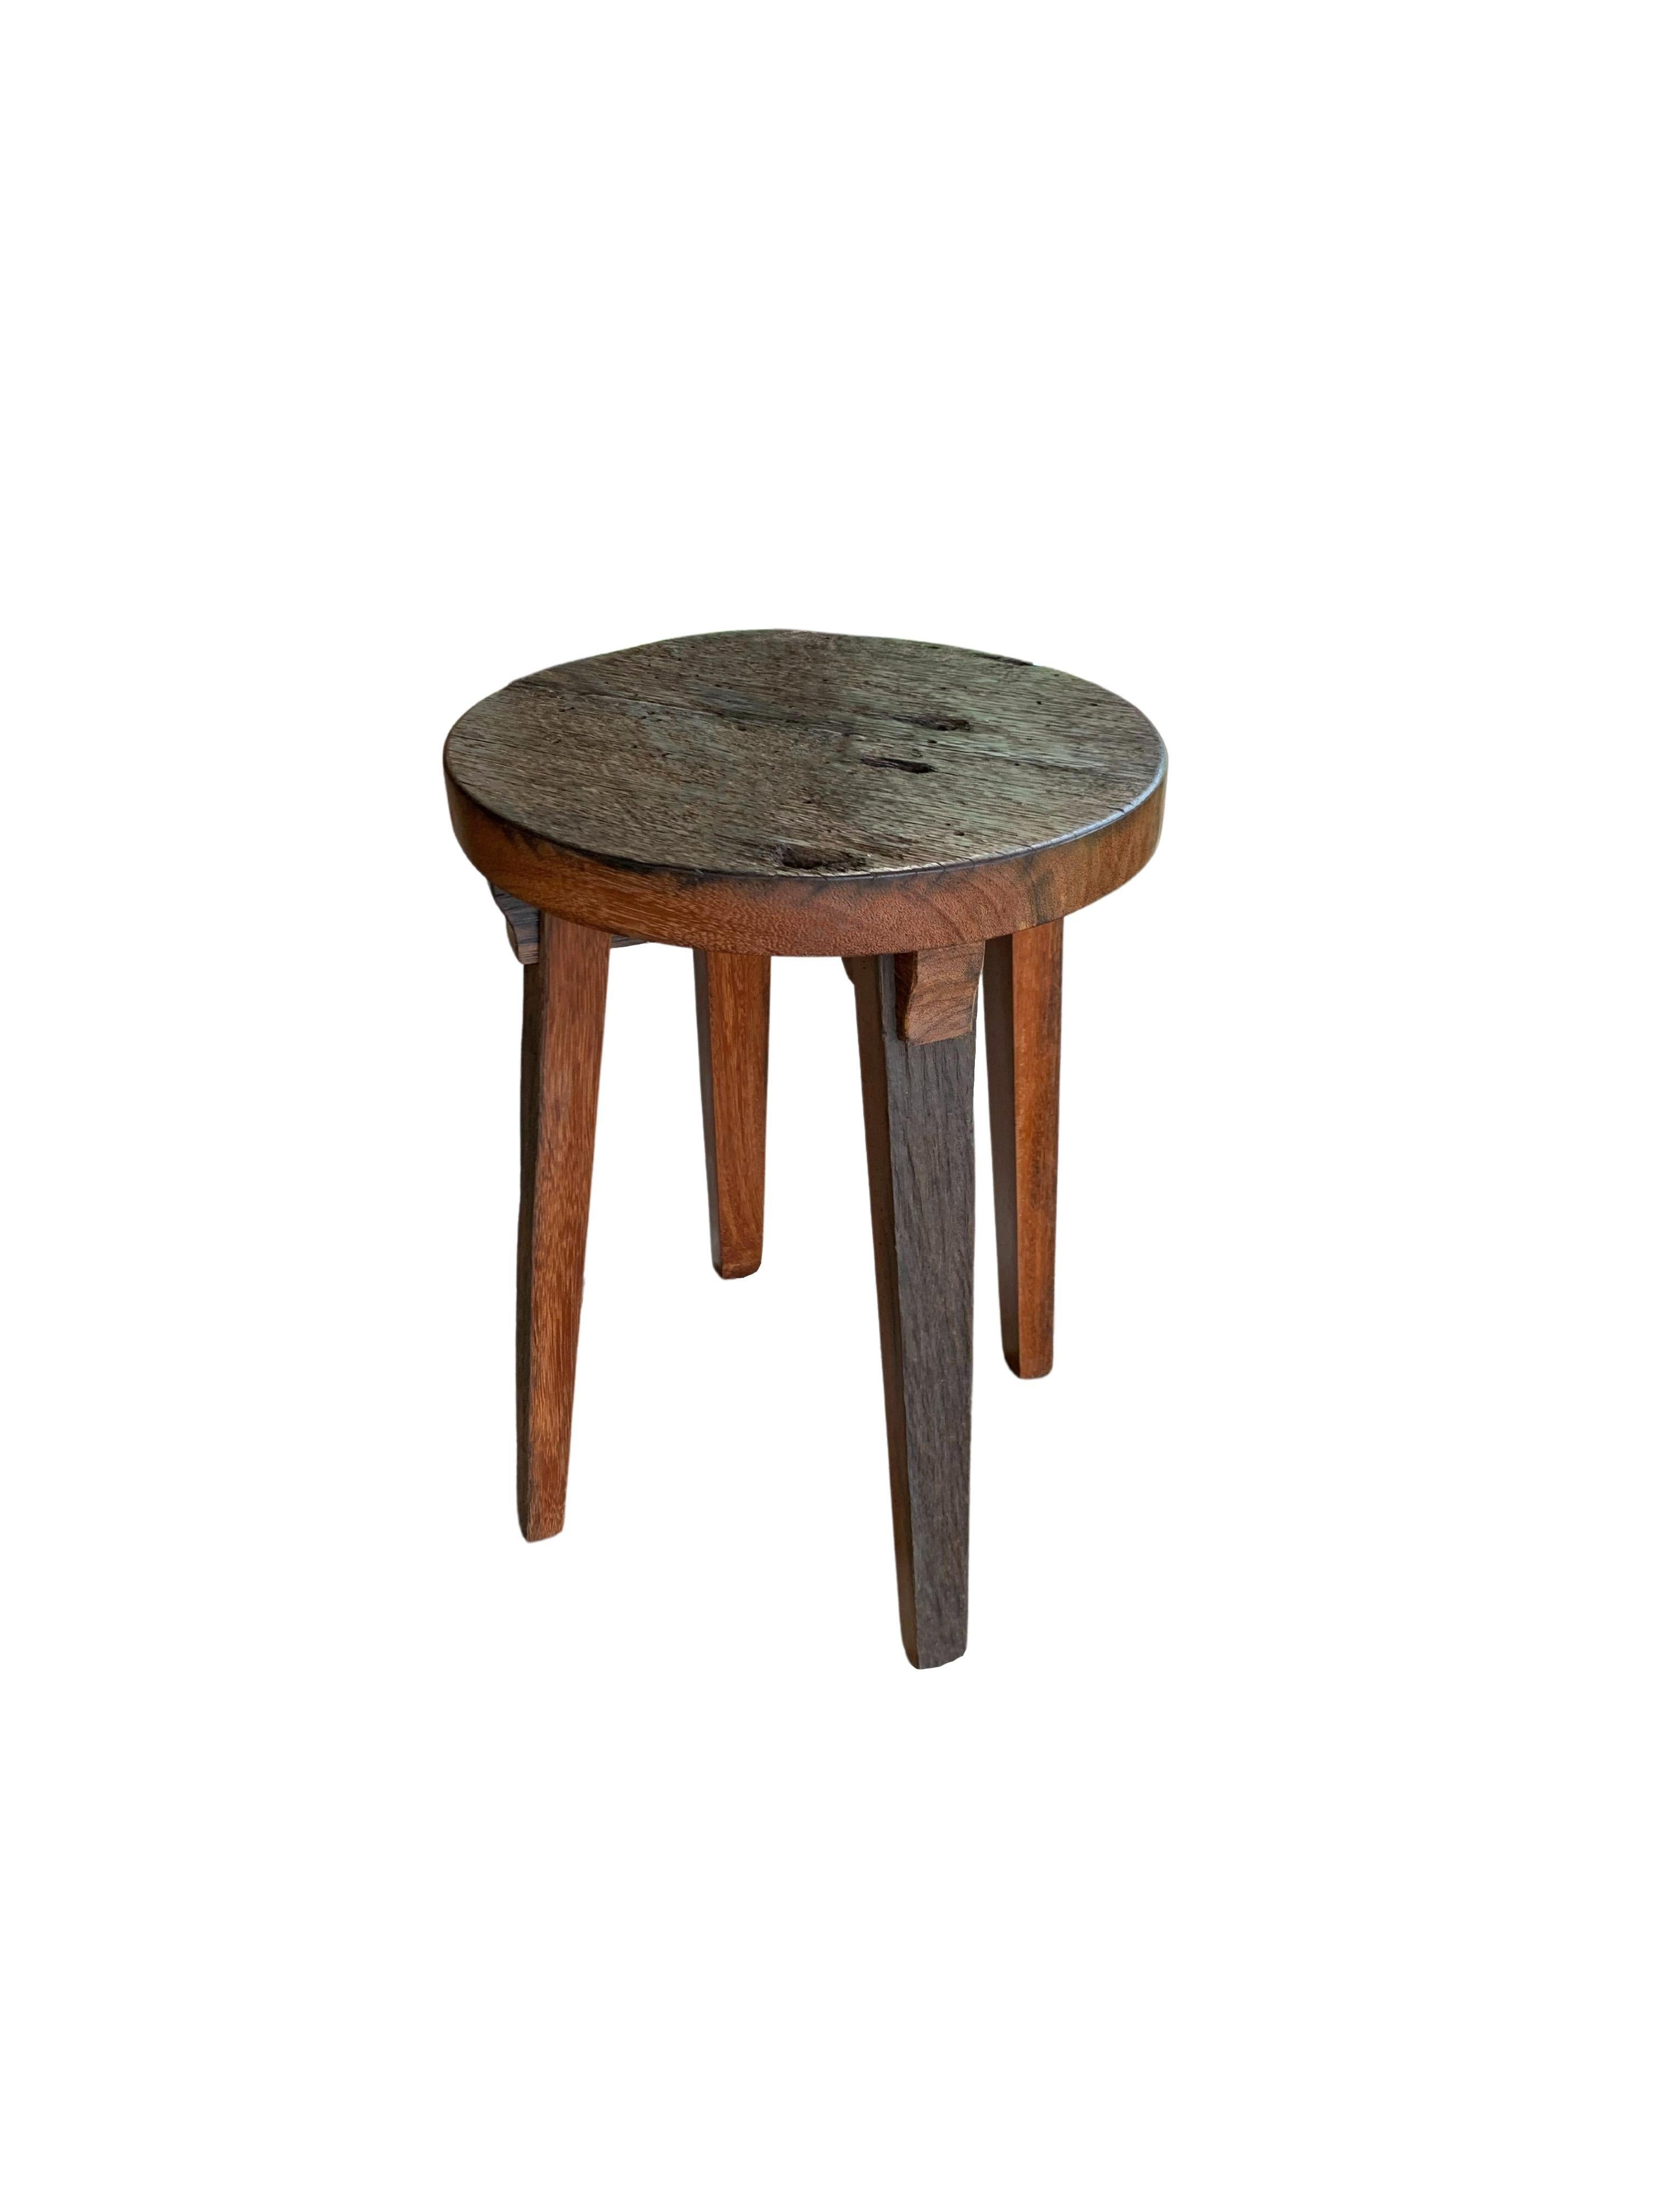 Ironwod Stool Modern Organic, Hand Crafted with Artisanal Wood Joinery For  Sale at 1stDibs